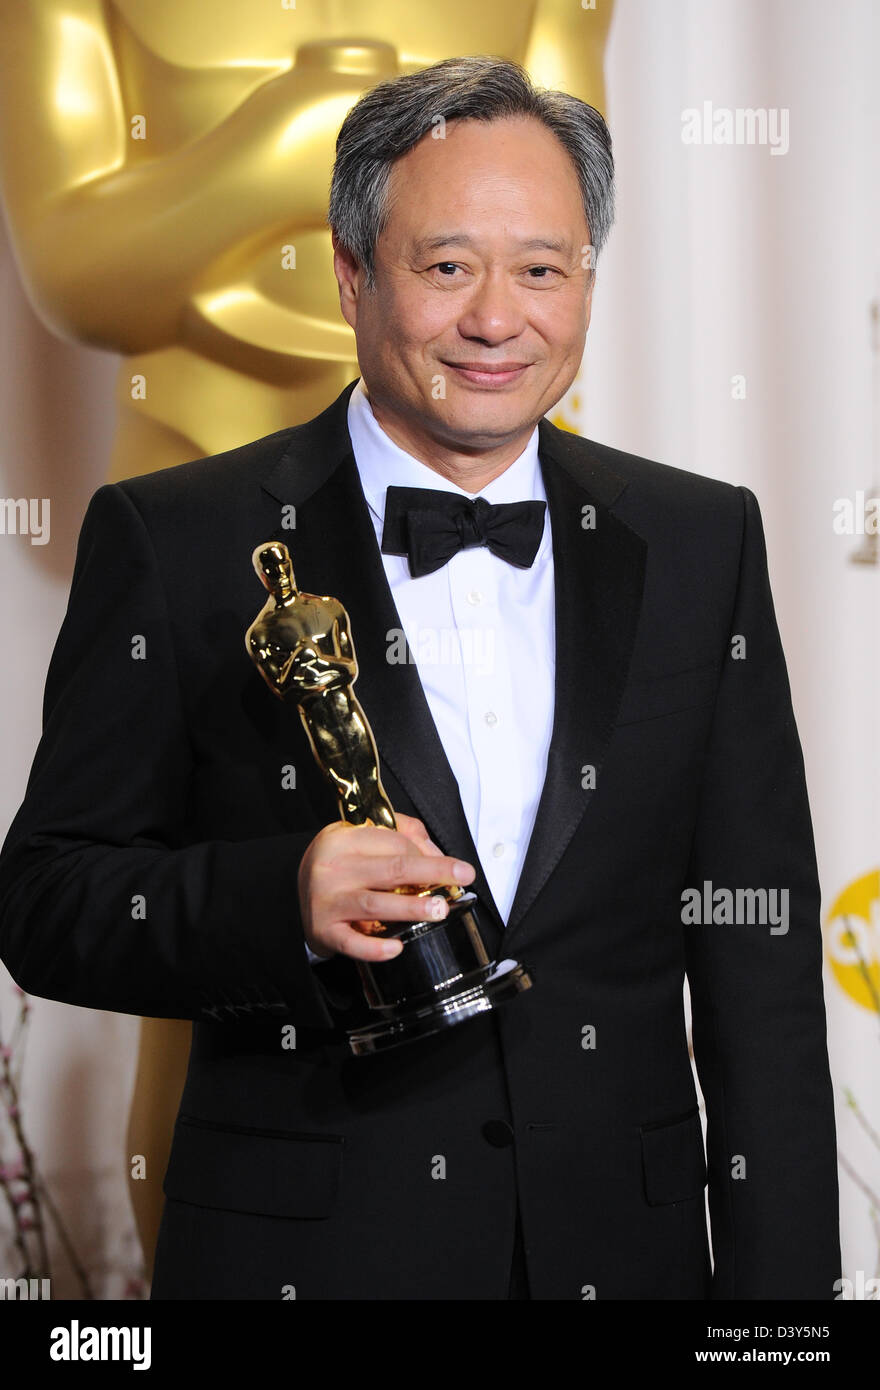 Los Angeles, USA. 24th February 2013. Ang Lee in the winners press room at the 85th Annual Academy Awards Oscars, Los Angeles, America - 24 Feb 2013.  Credit:  Sydney Alford / Alamy Live News Stock Photo